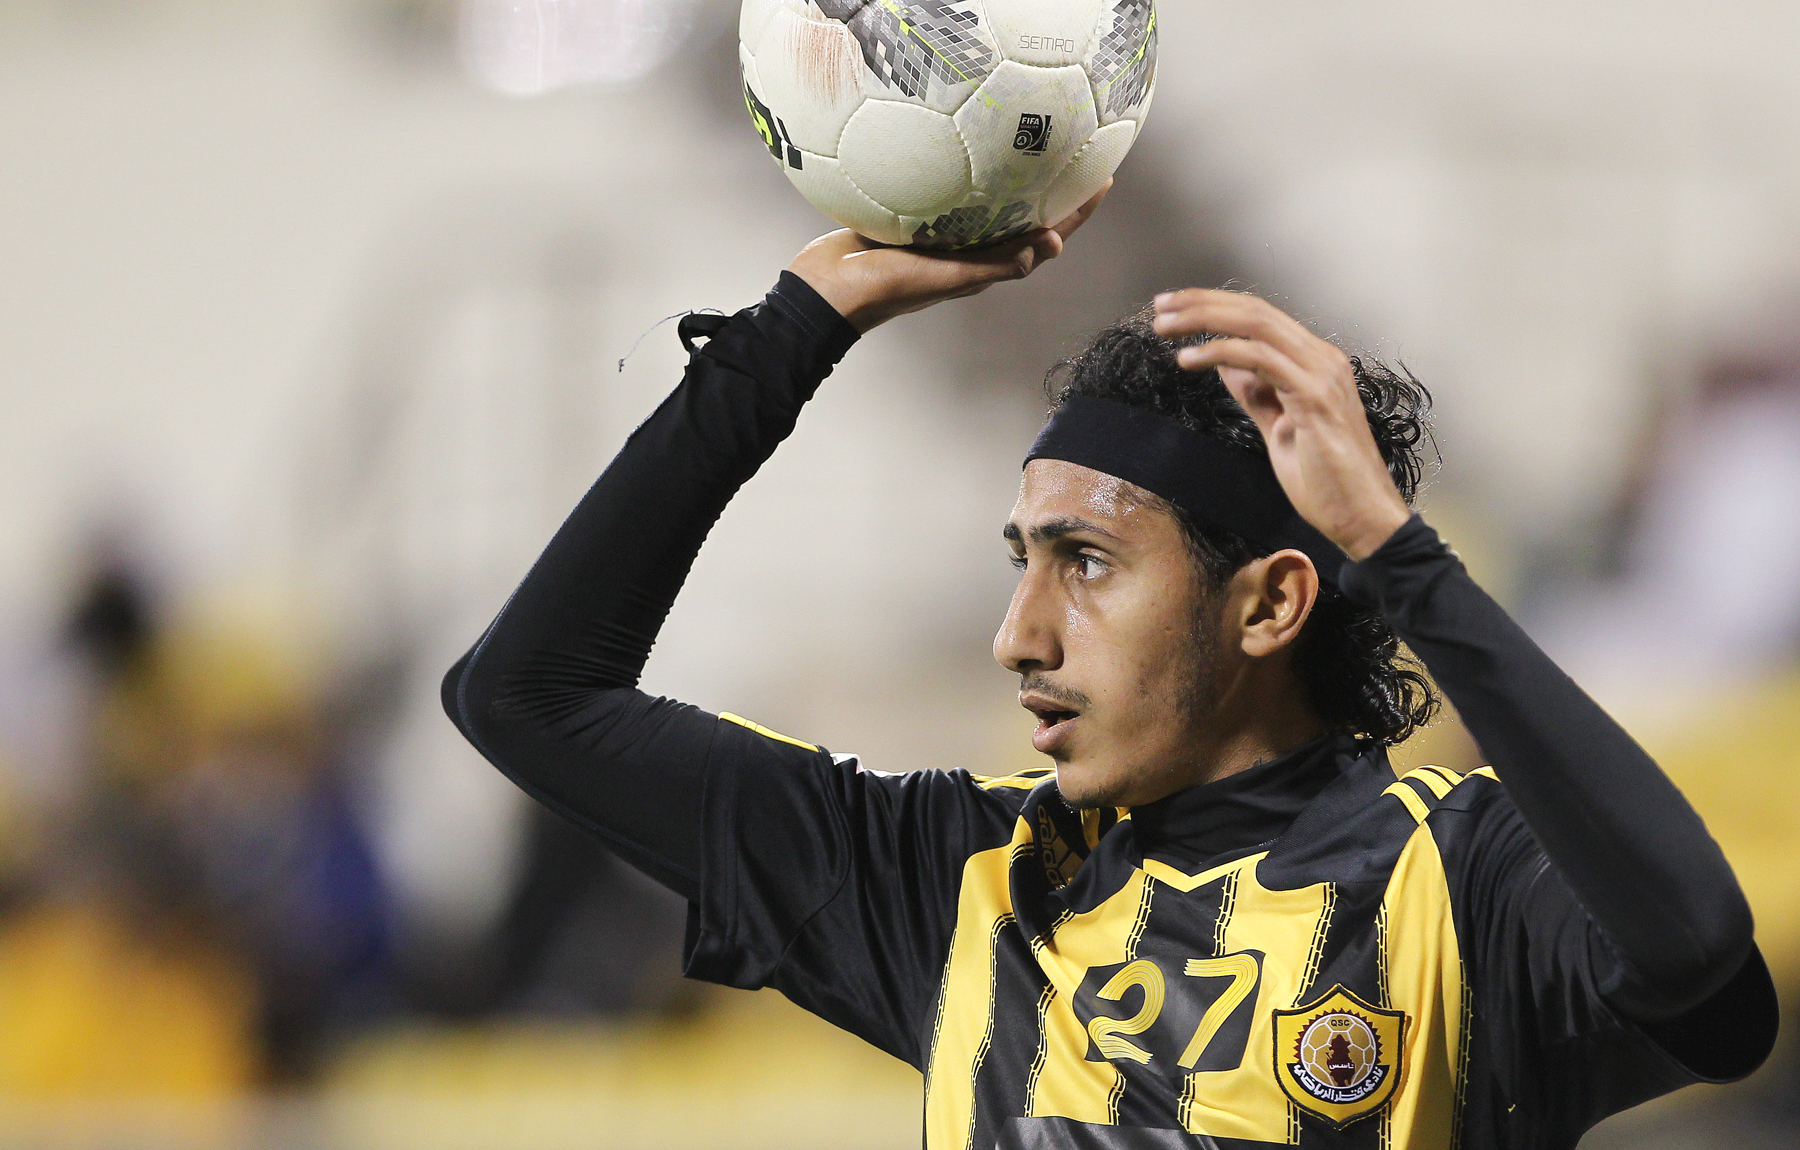 a soccer player holds up the ball while holding it in his hands